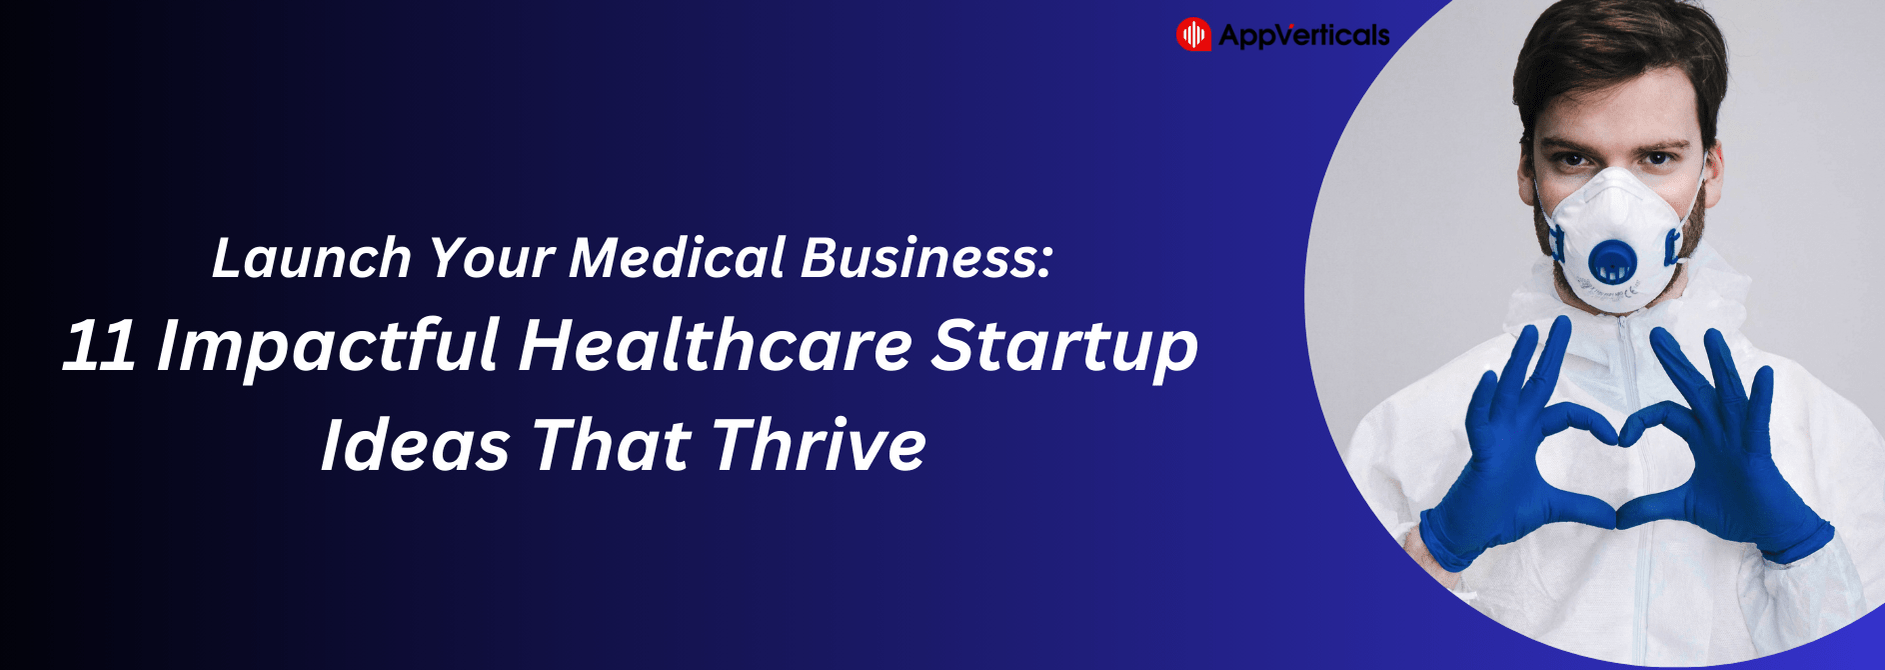 Launch Your Medical Business: 11 Impactful Healthcare Startup Ideas That Thrive